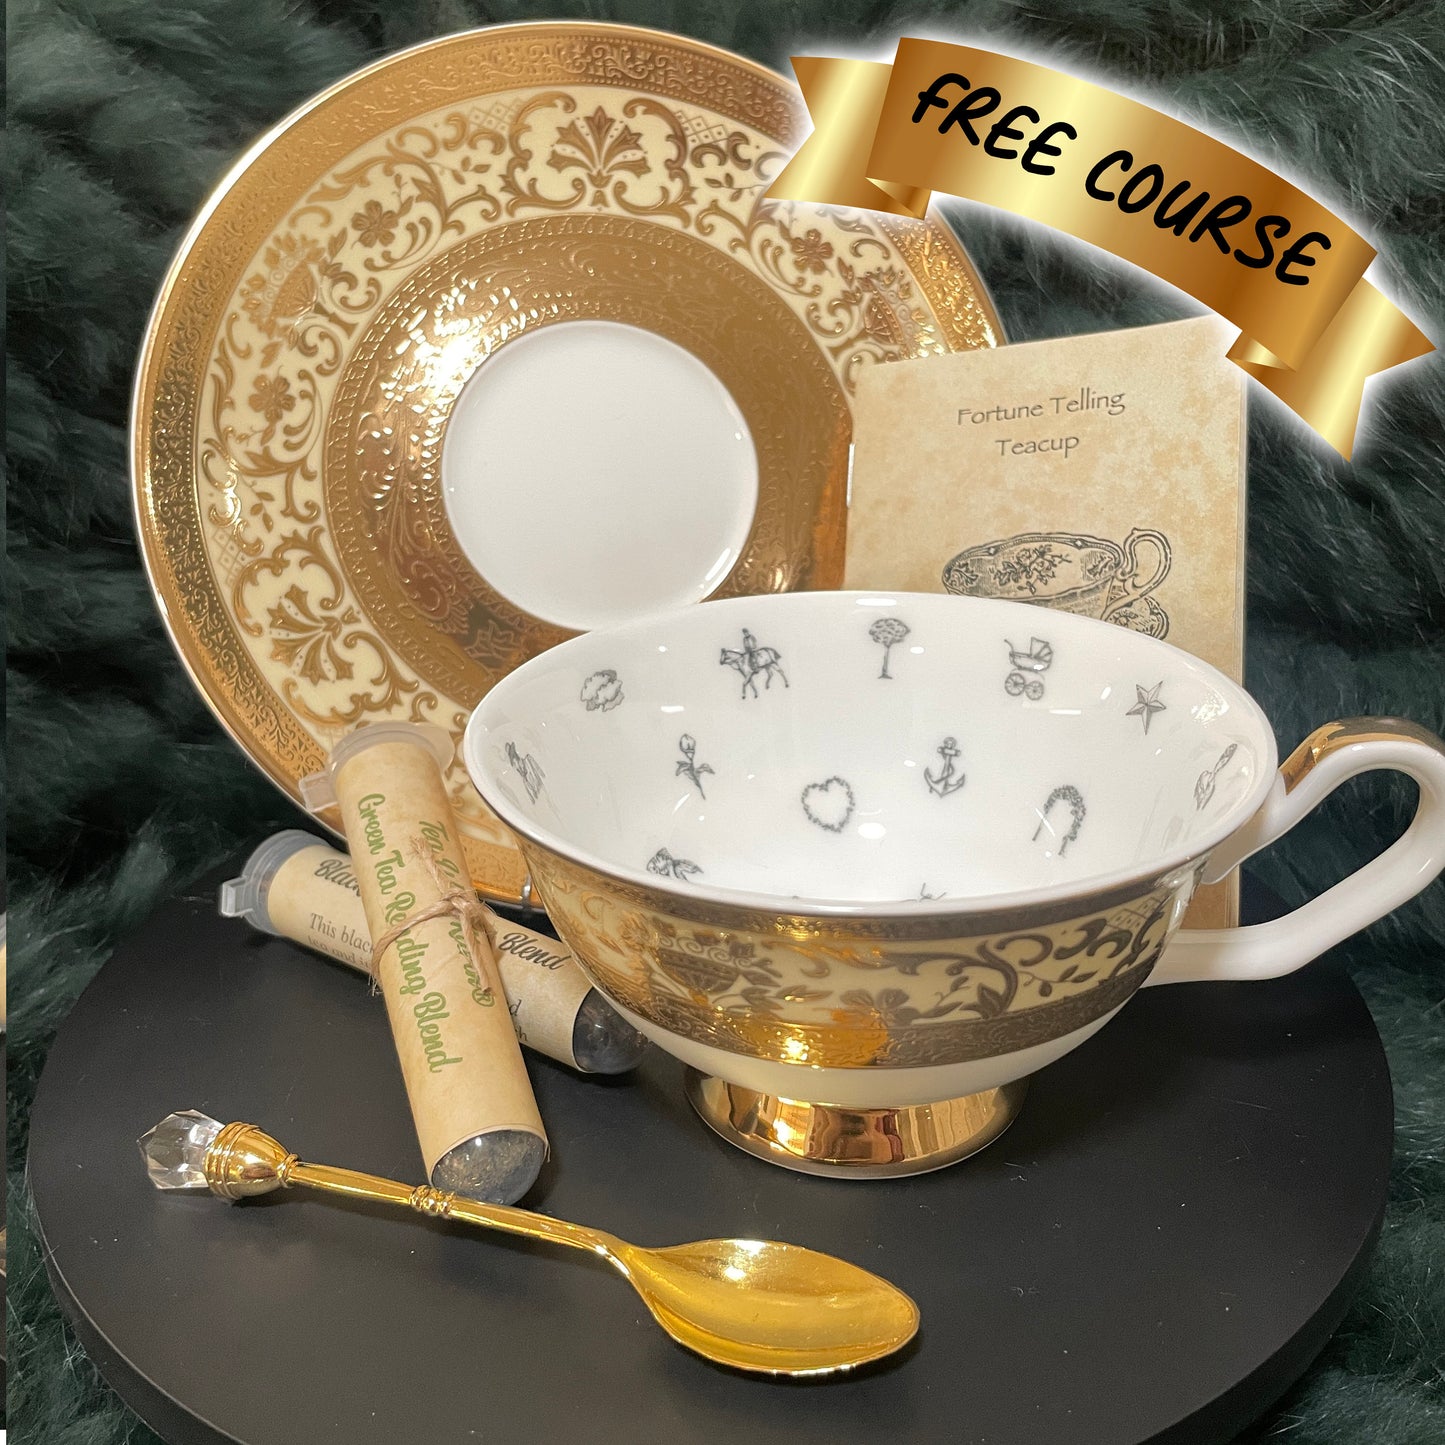 Cream and embossed gold tea cup and saucer set. Teacup and saucer set. FREE course Tea leaf reading.